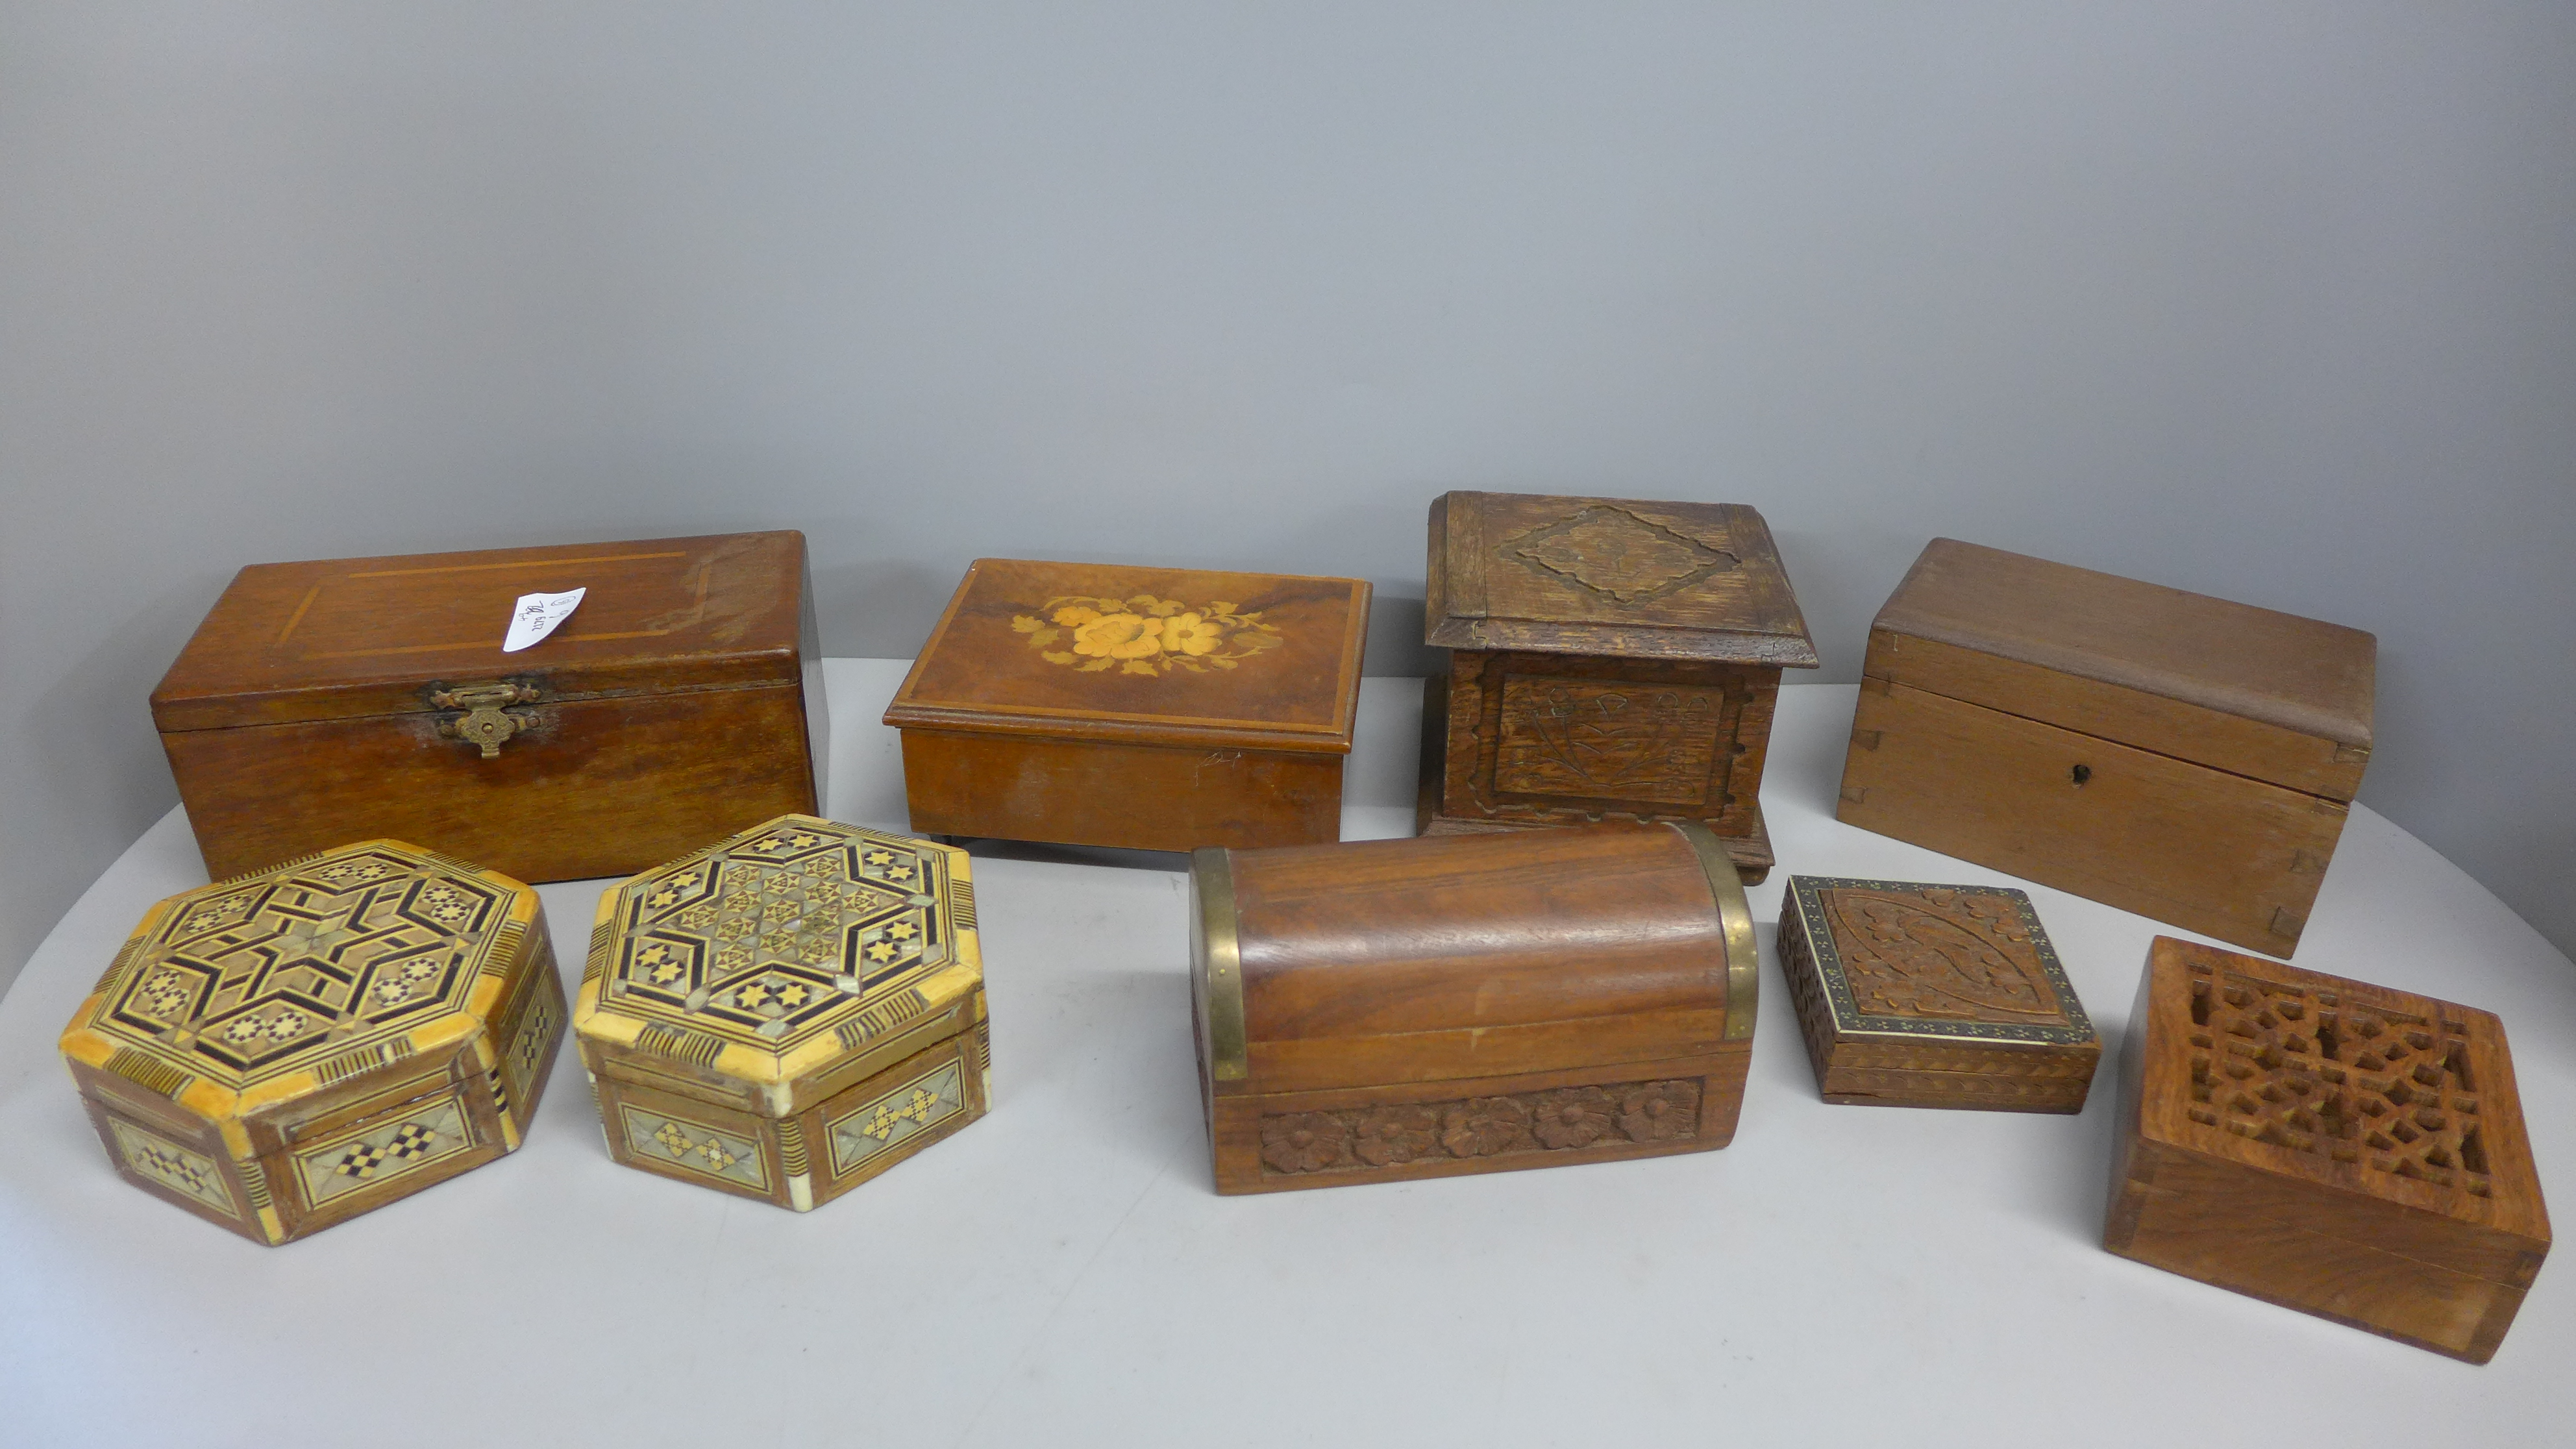 Nine decorative carved and inlaid wooden boxes